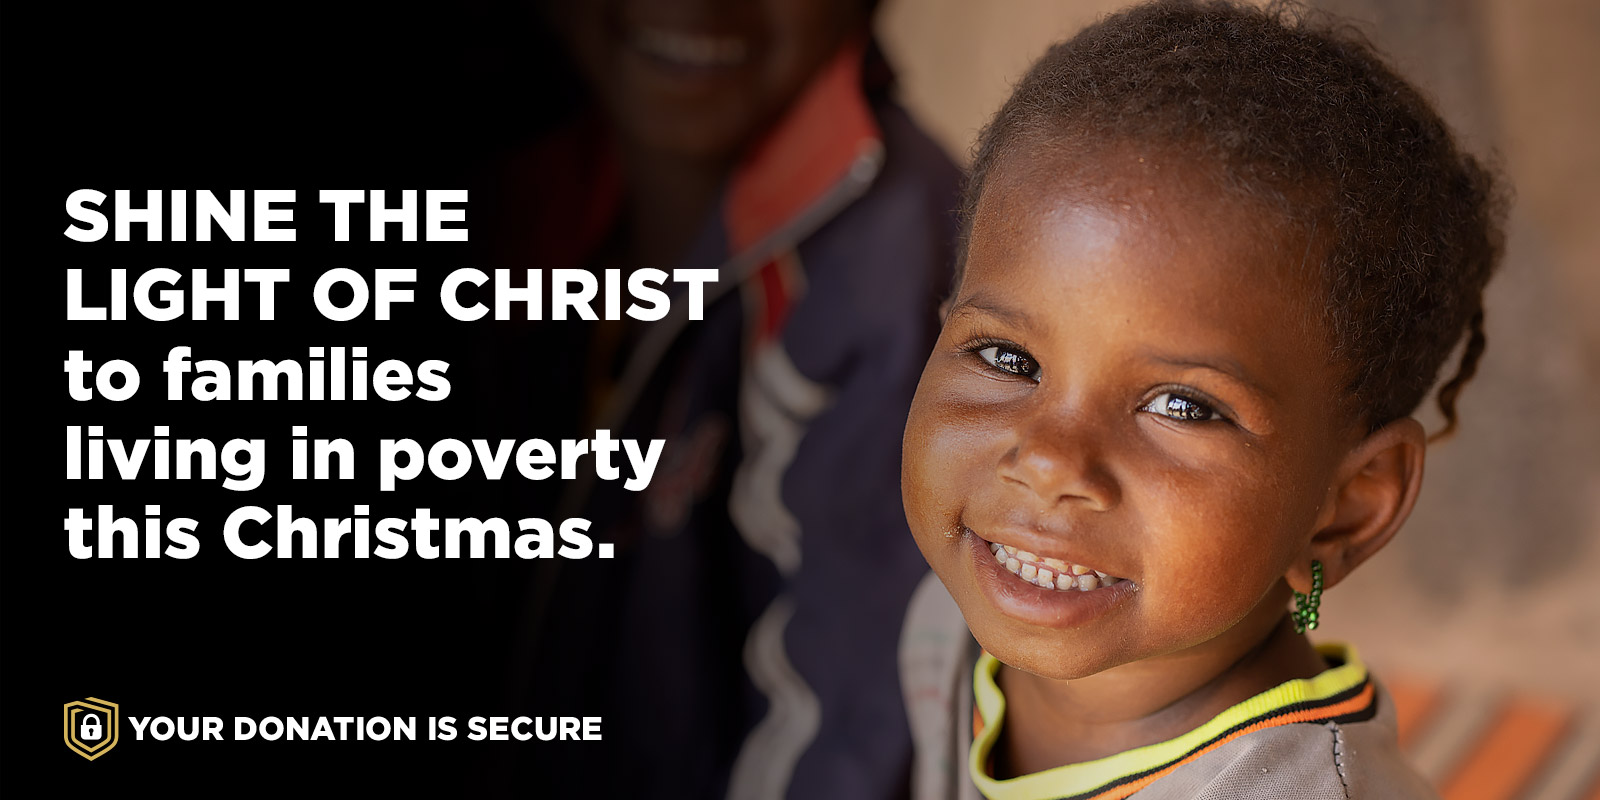 Shine the Light of Christ to families living in poverty this Christmas.